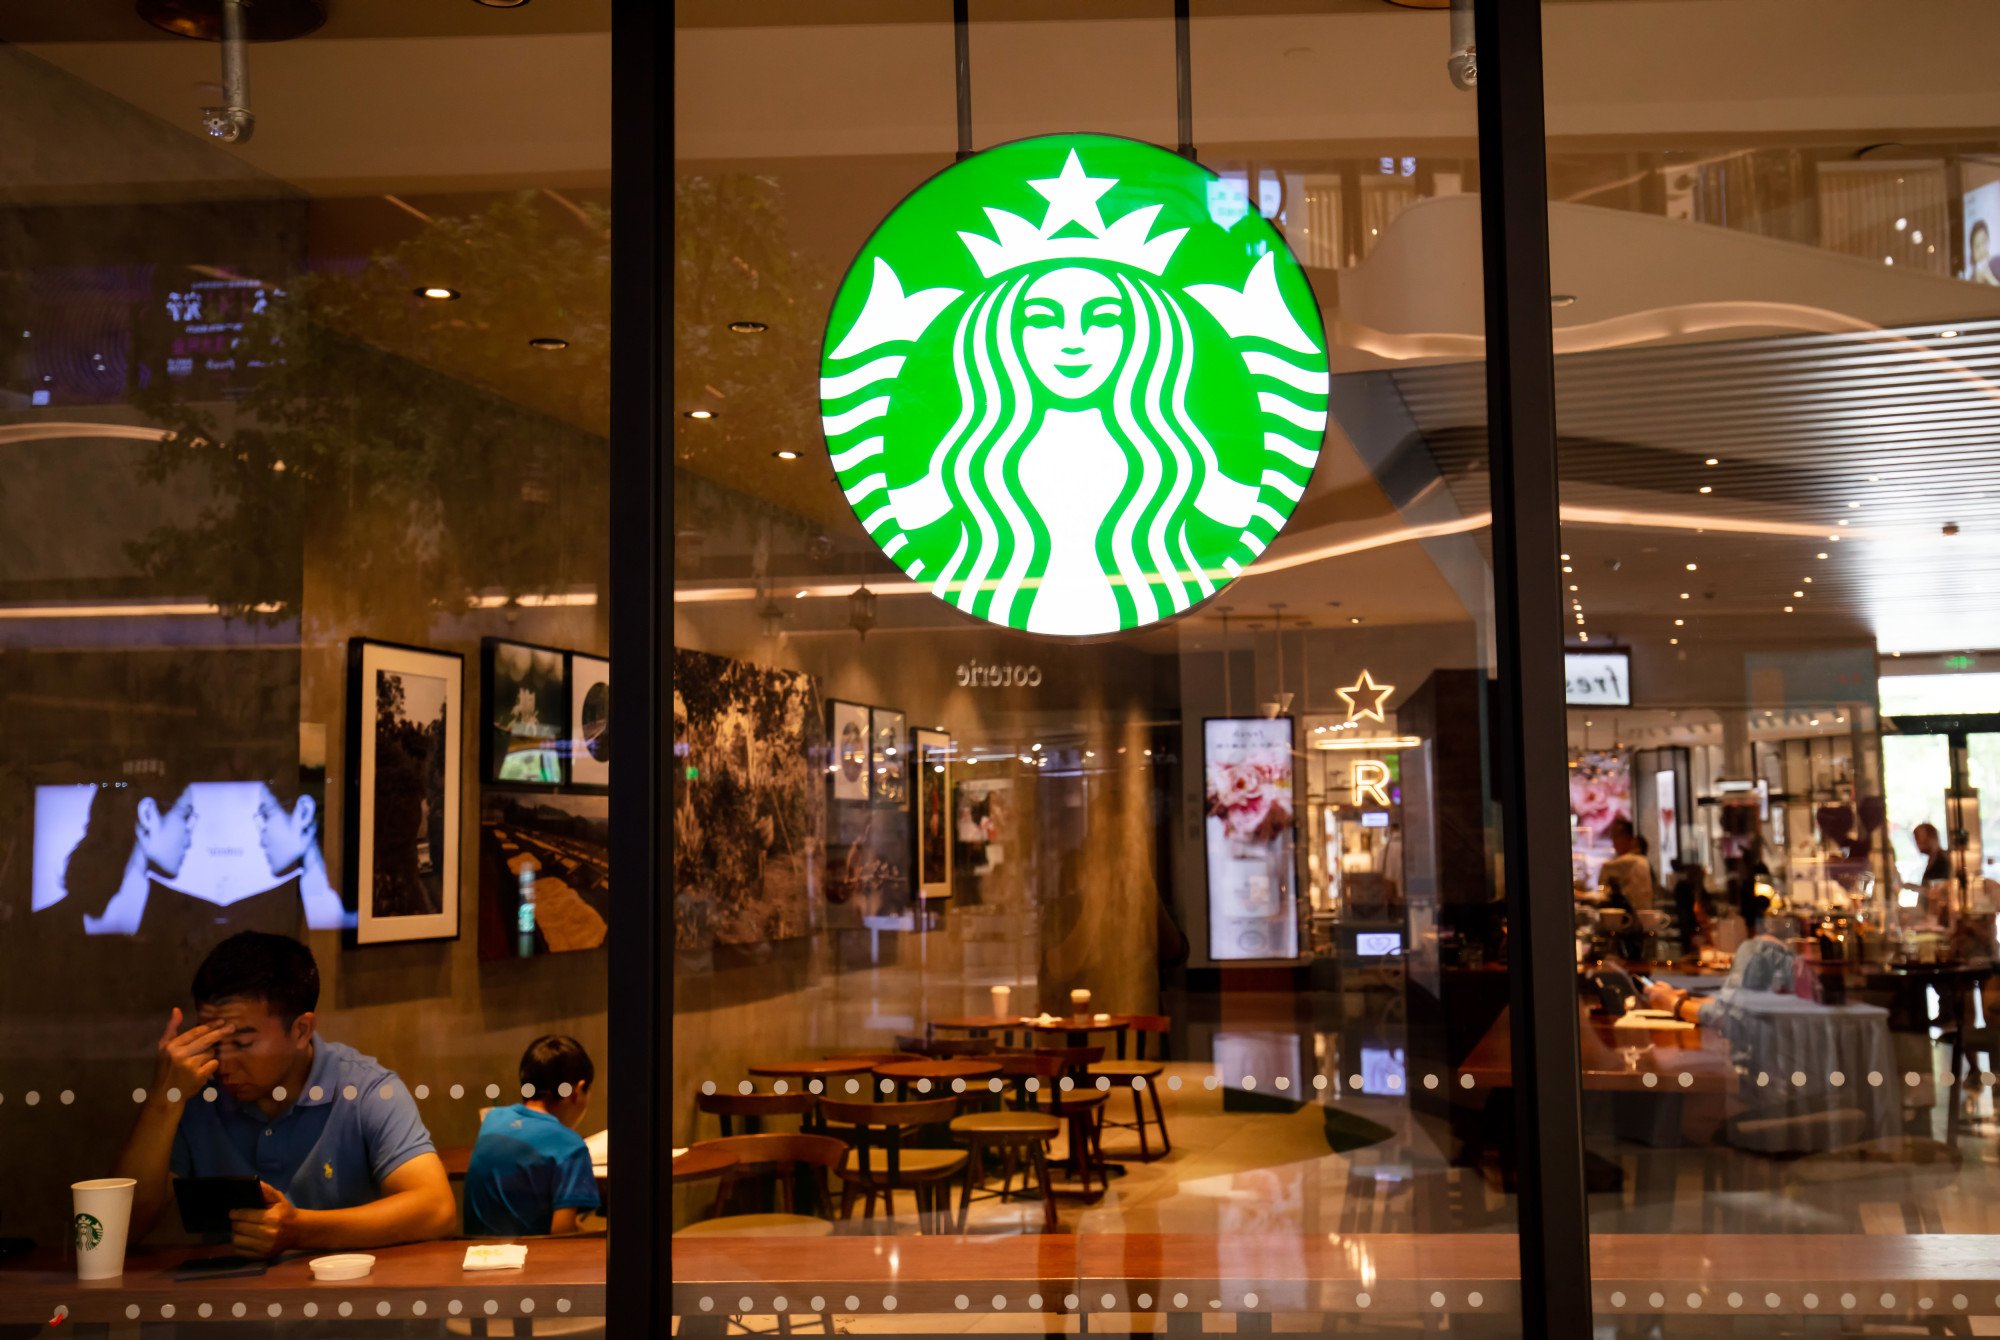 The customer who filmed the Starbucks incident said the delivery worker maintained his cool throughout. Photo: Shutterstock